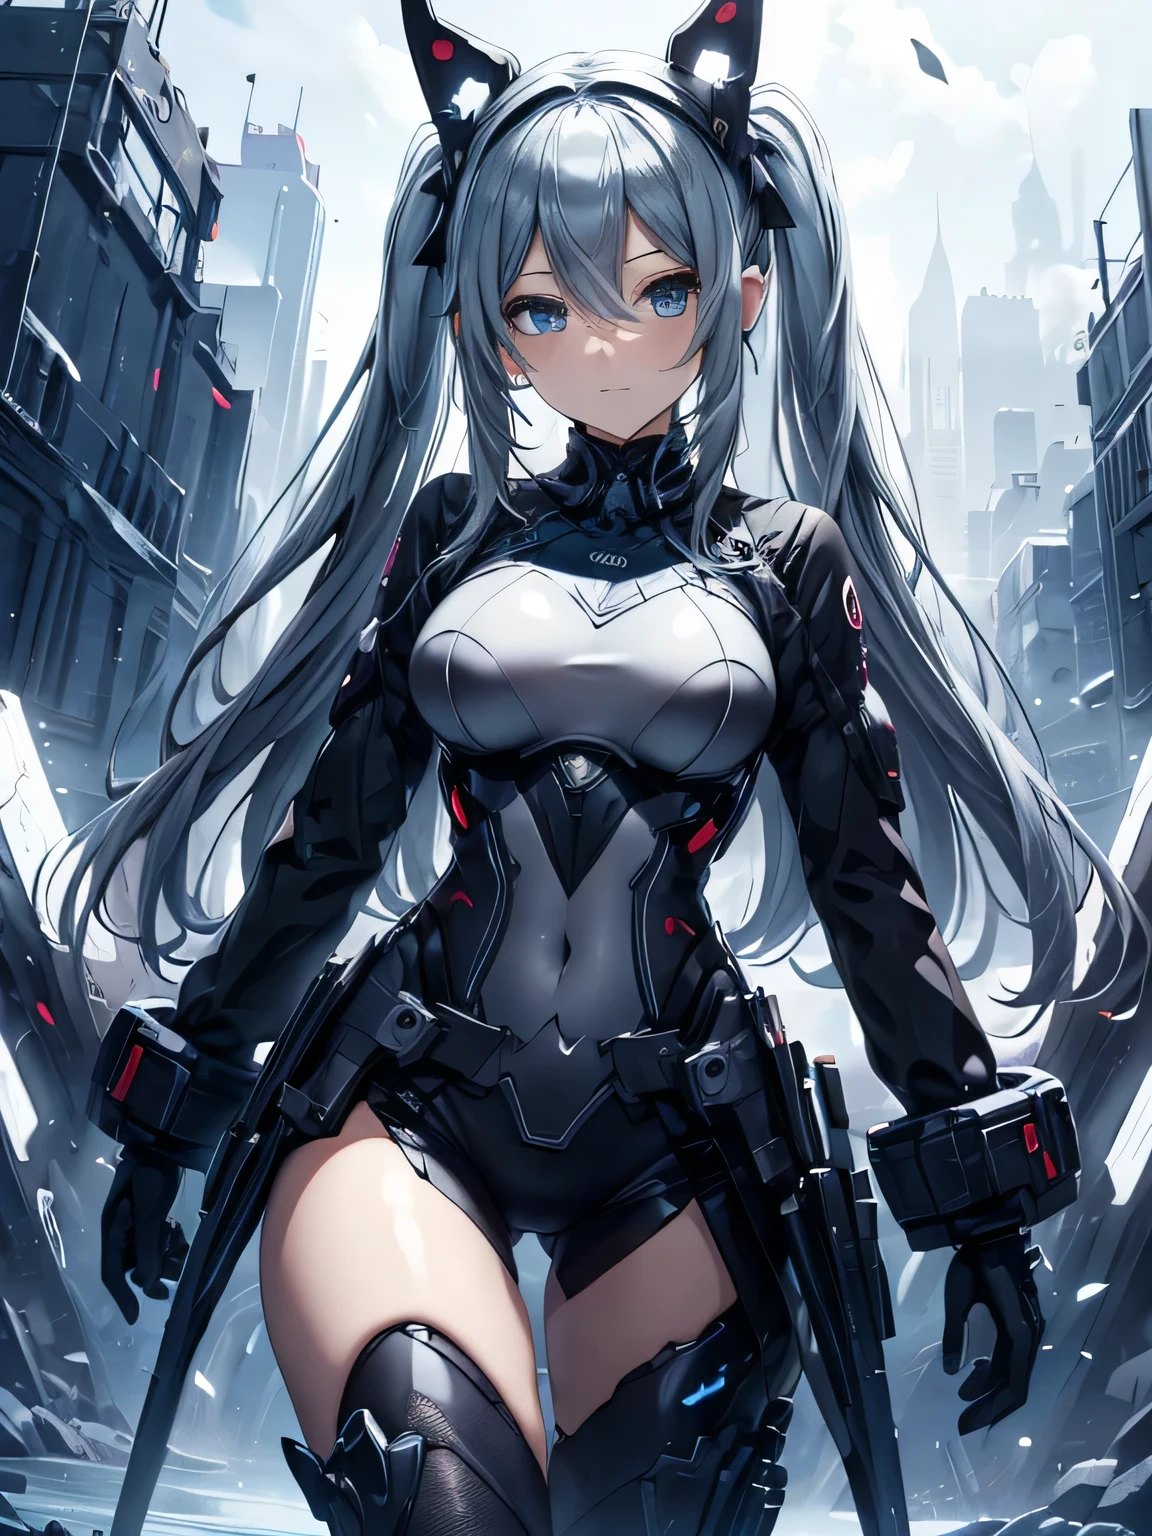 
(maximum quality), ((the best definition)) Miku Hatsune deep blue eyes ((The best quality)), lying on her left side, half lateral pose, barefoot, well defined legs, The best quality, dystopian future landscape at sunset, dynamic poses, action atack